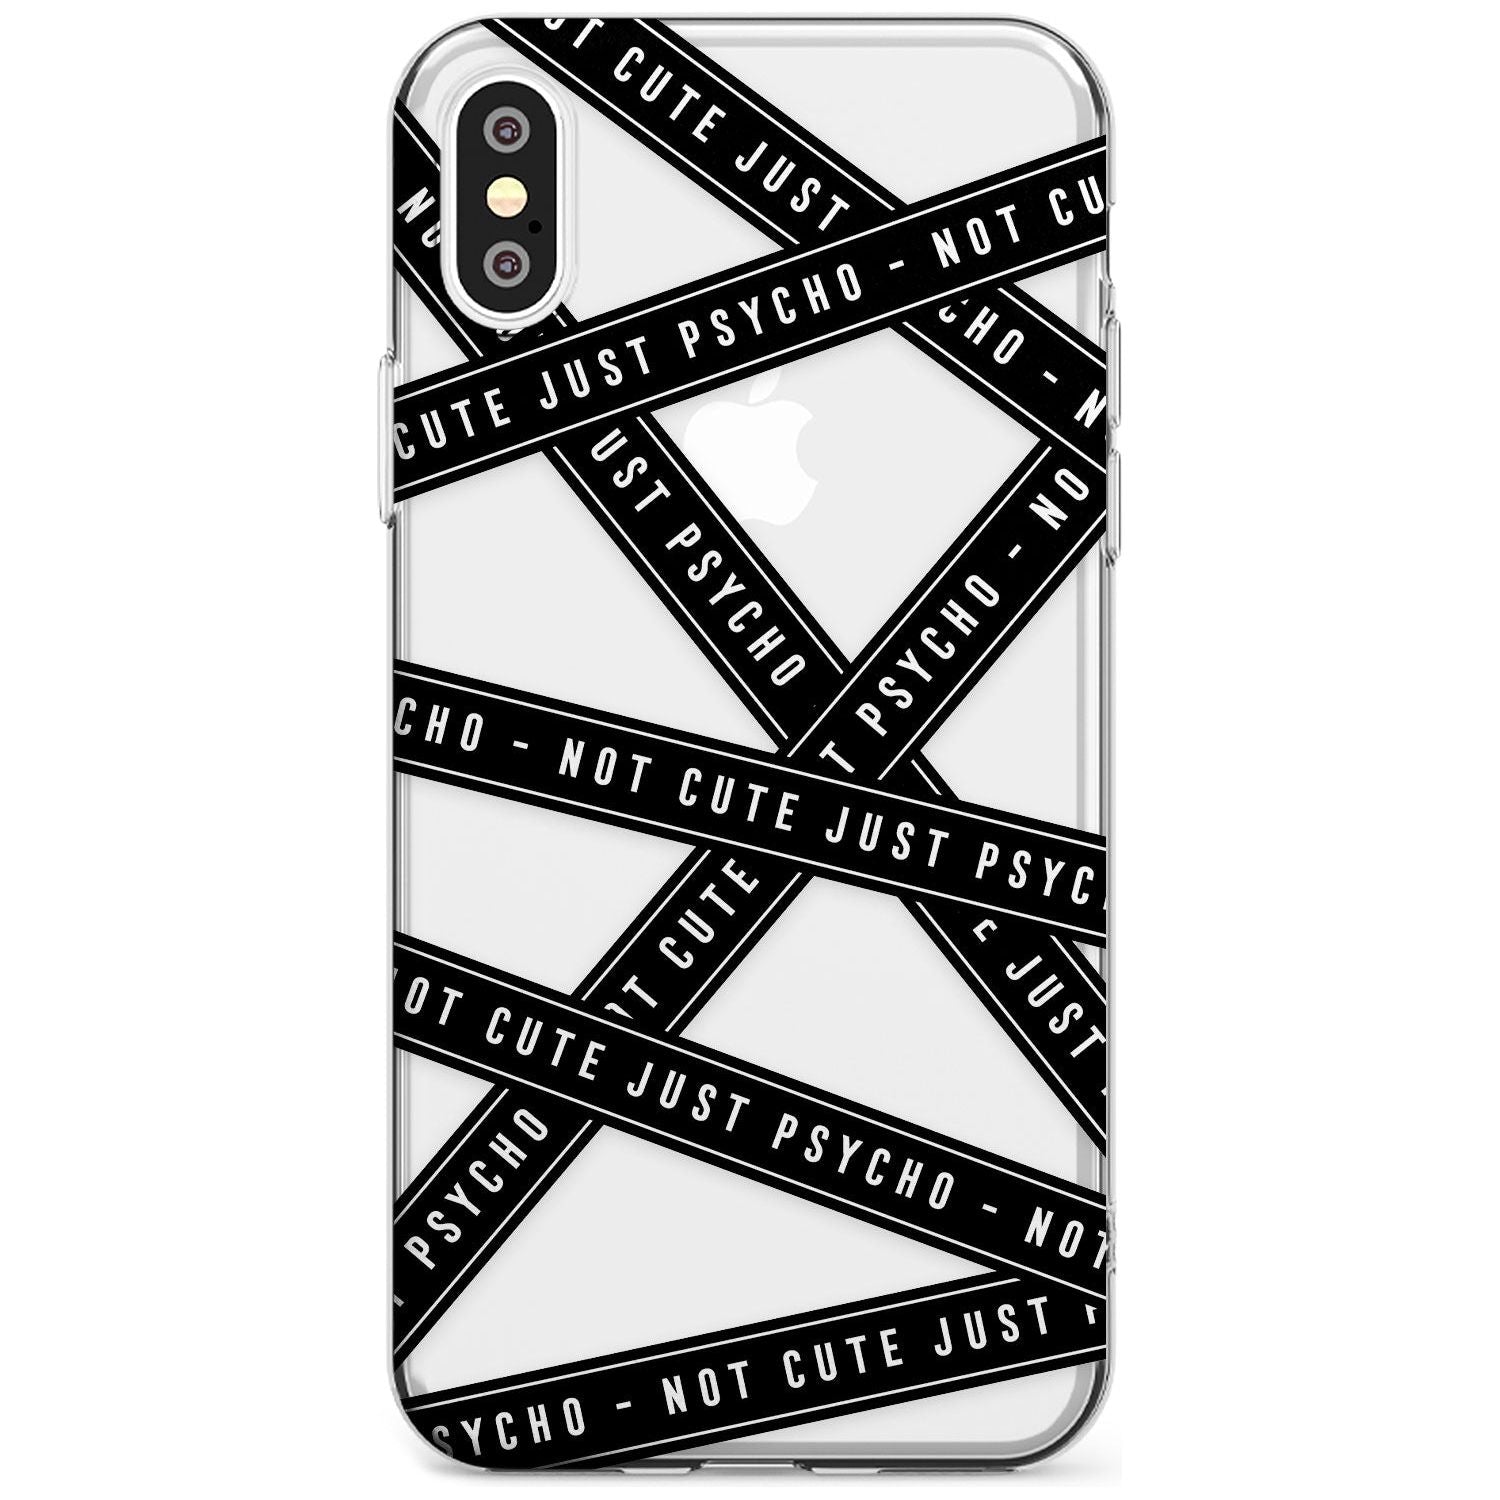 Caution Tape (Clear) Not Cute Just Psycho Slim TPU Phone Case Warehouse X XS Max XR